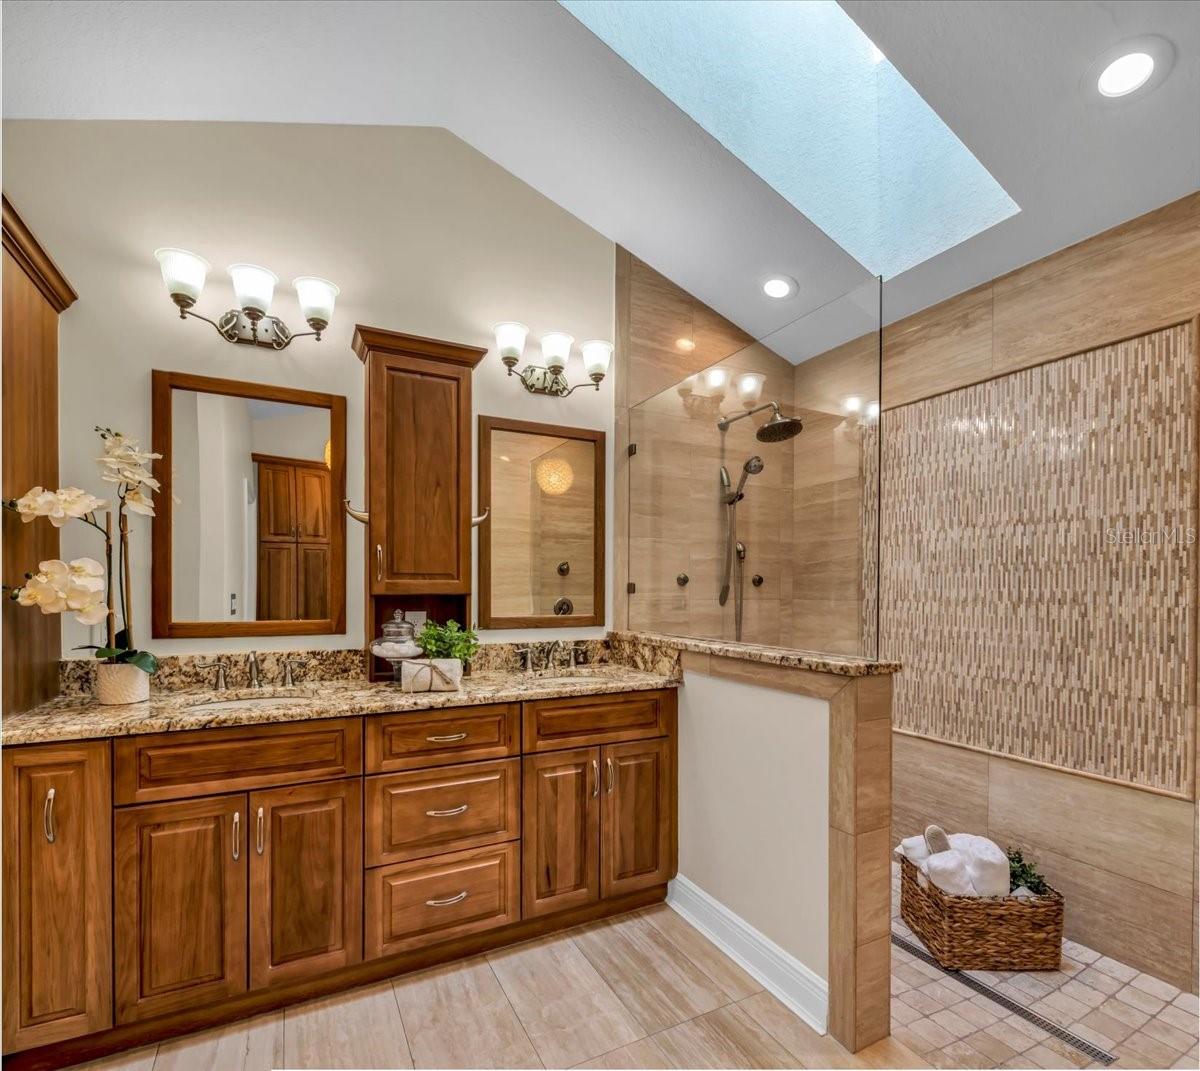 Primary bath with large walk-in shower, dual sink vanity and walk-in closets